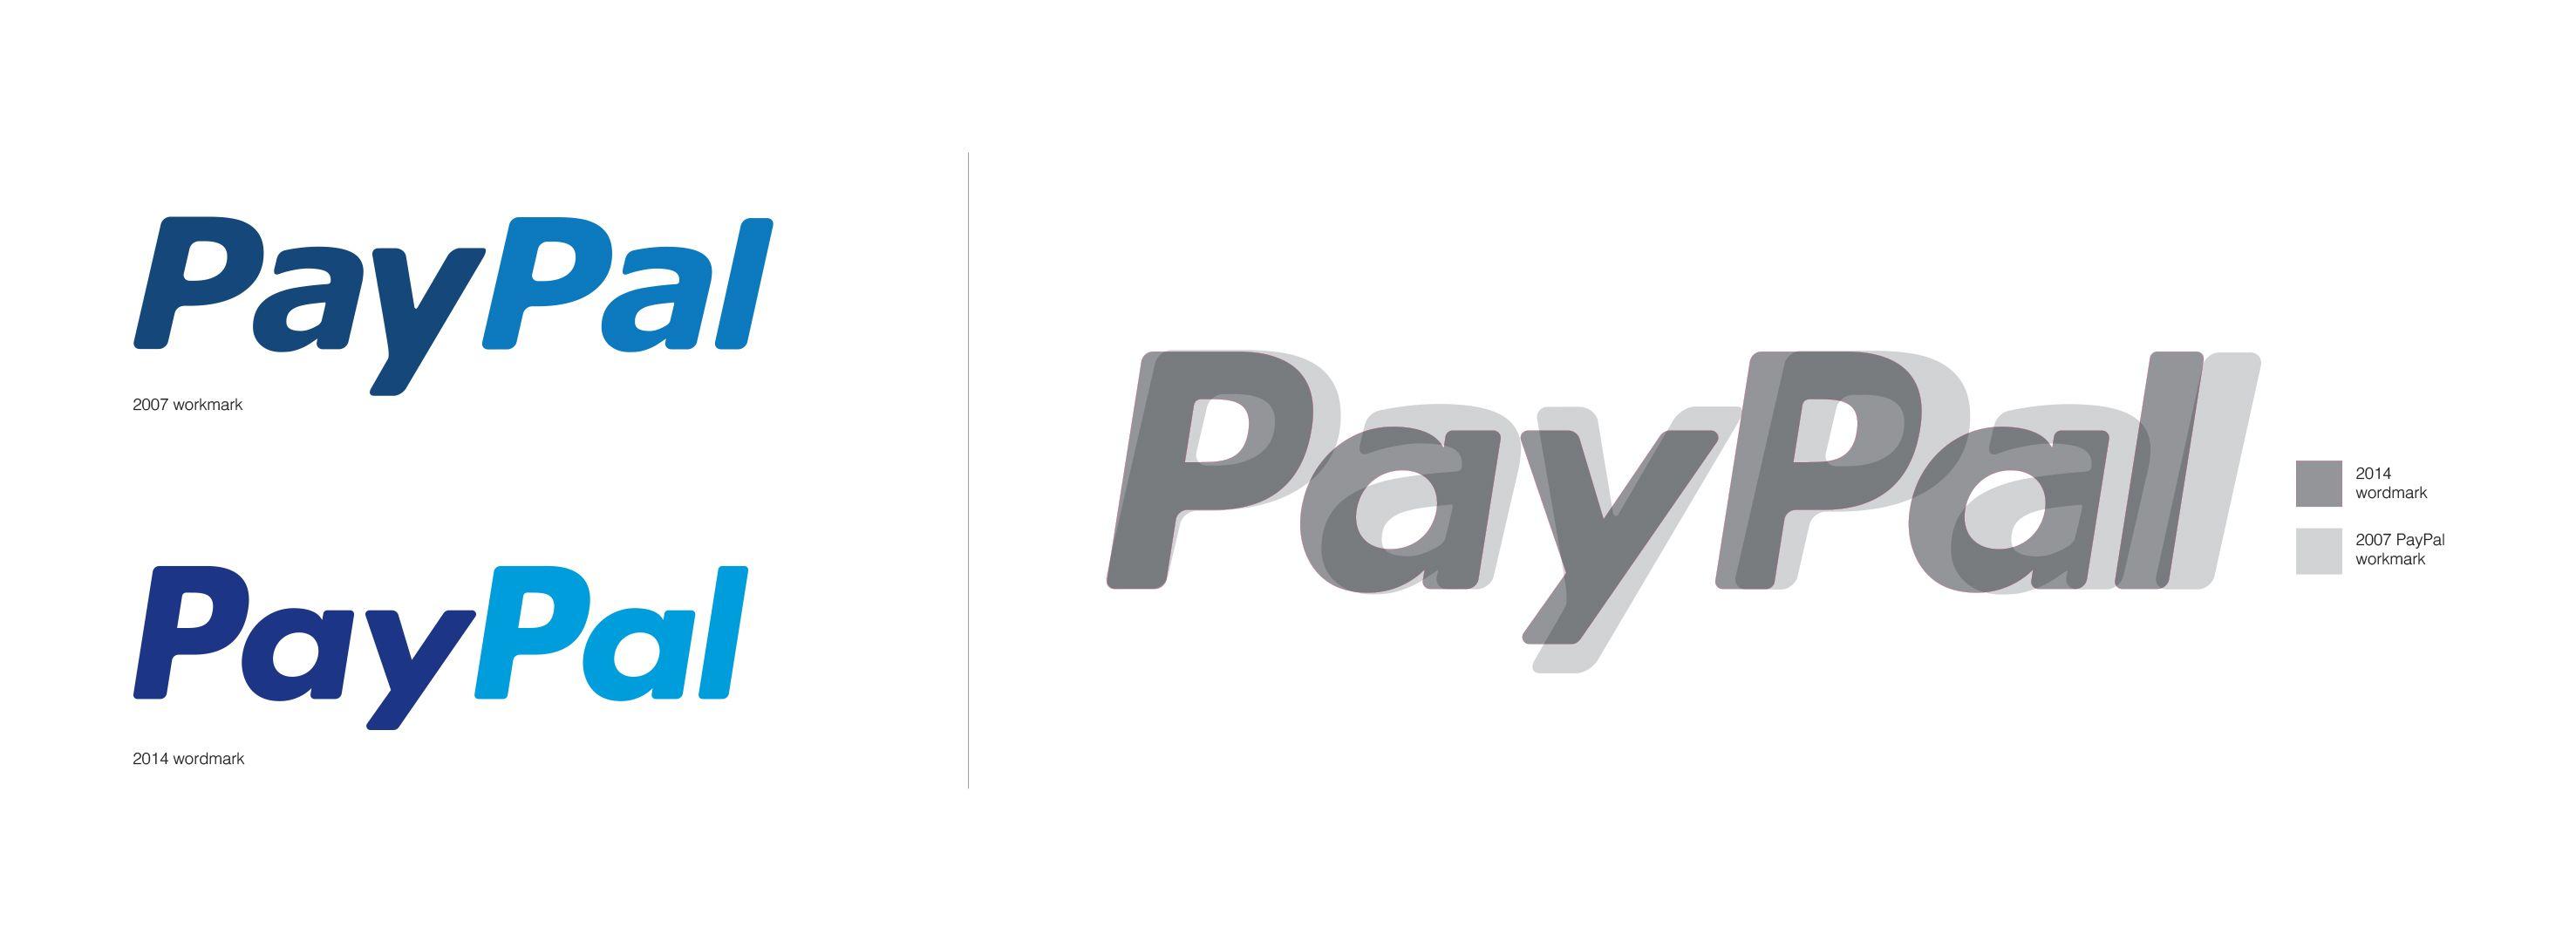 Old PayPal Logo - PayPal launches major brand refresh | Marketing Interactive